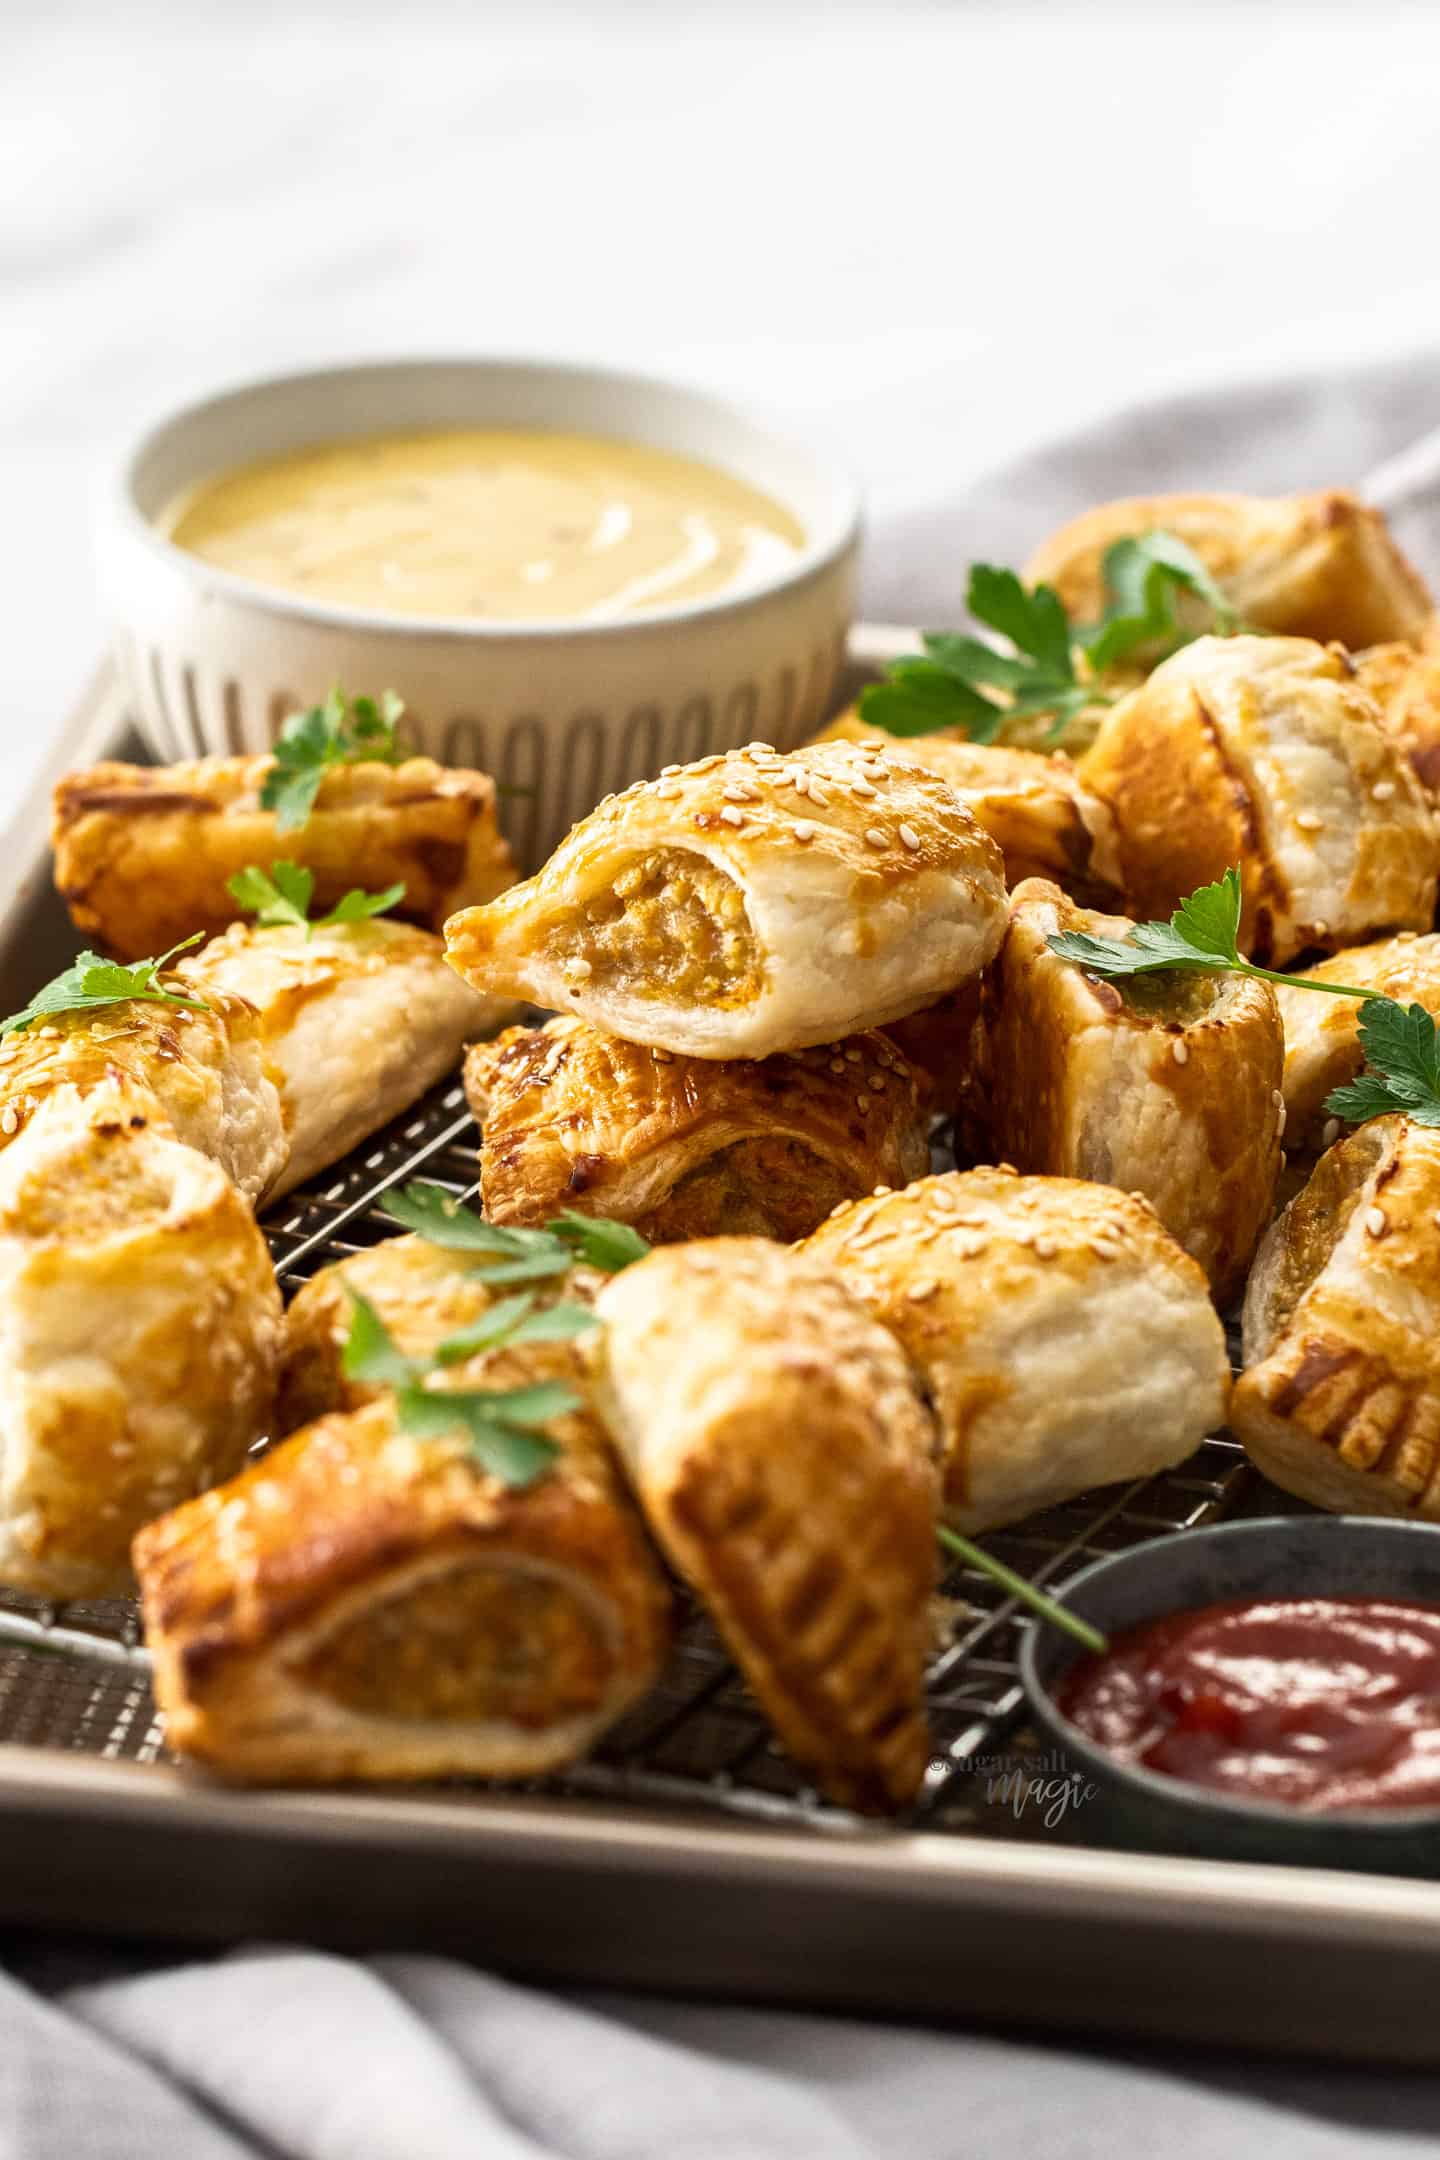 Chicken sausage rolls piled into a baking tray with a bowl of sauce in the background.